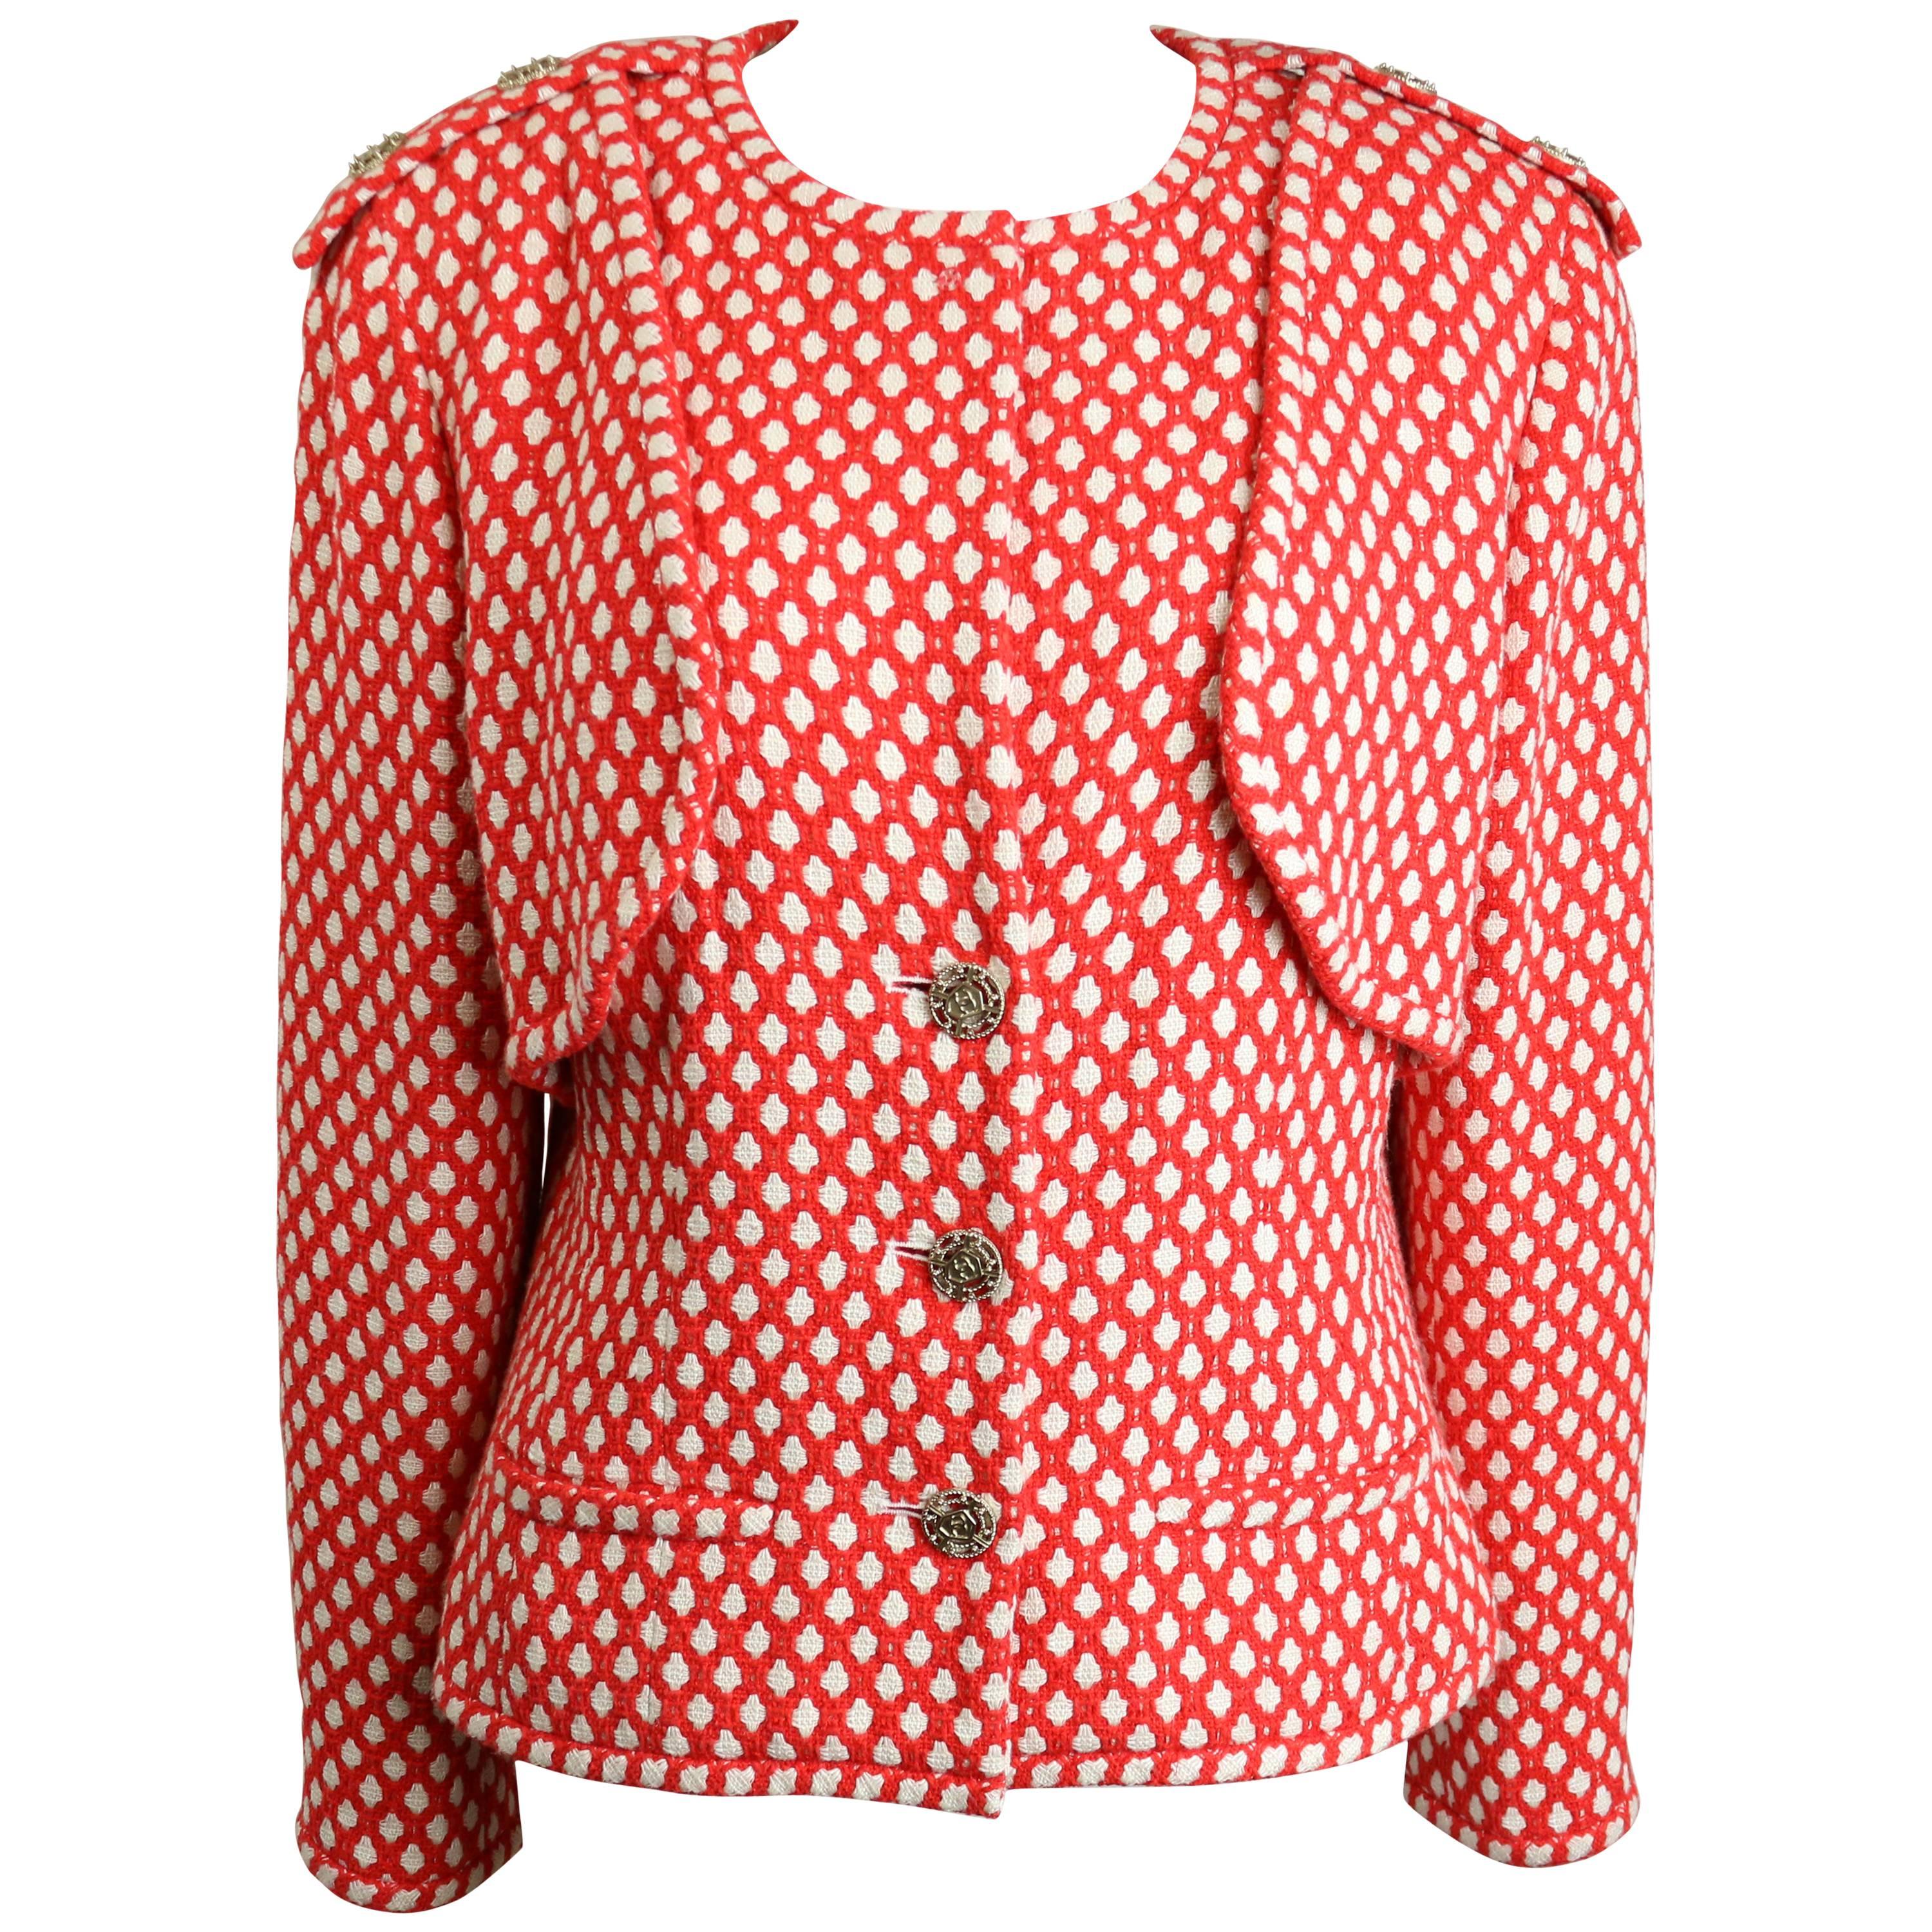 2008 Chanel Classic Red/White Polka Dot Tweed Jacket. 